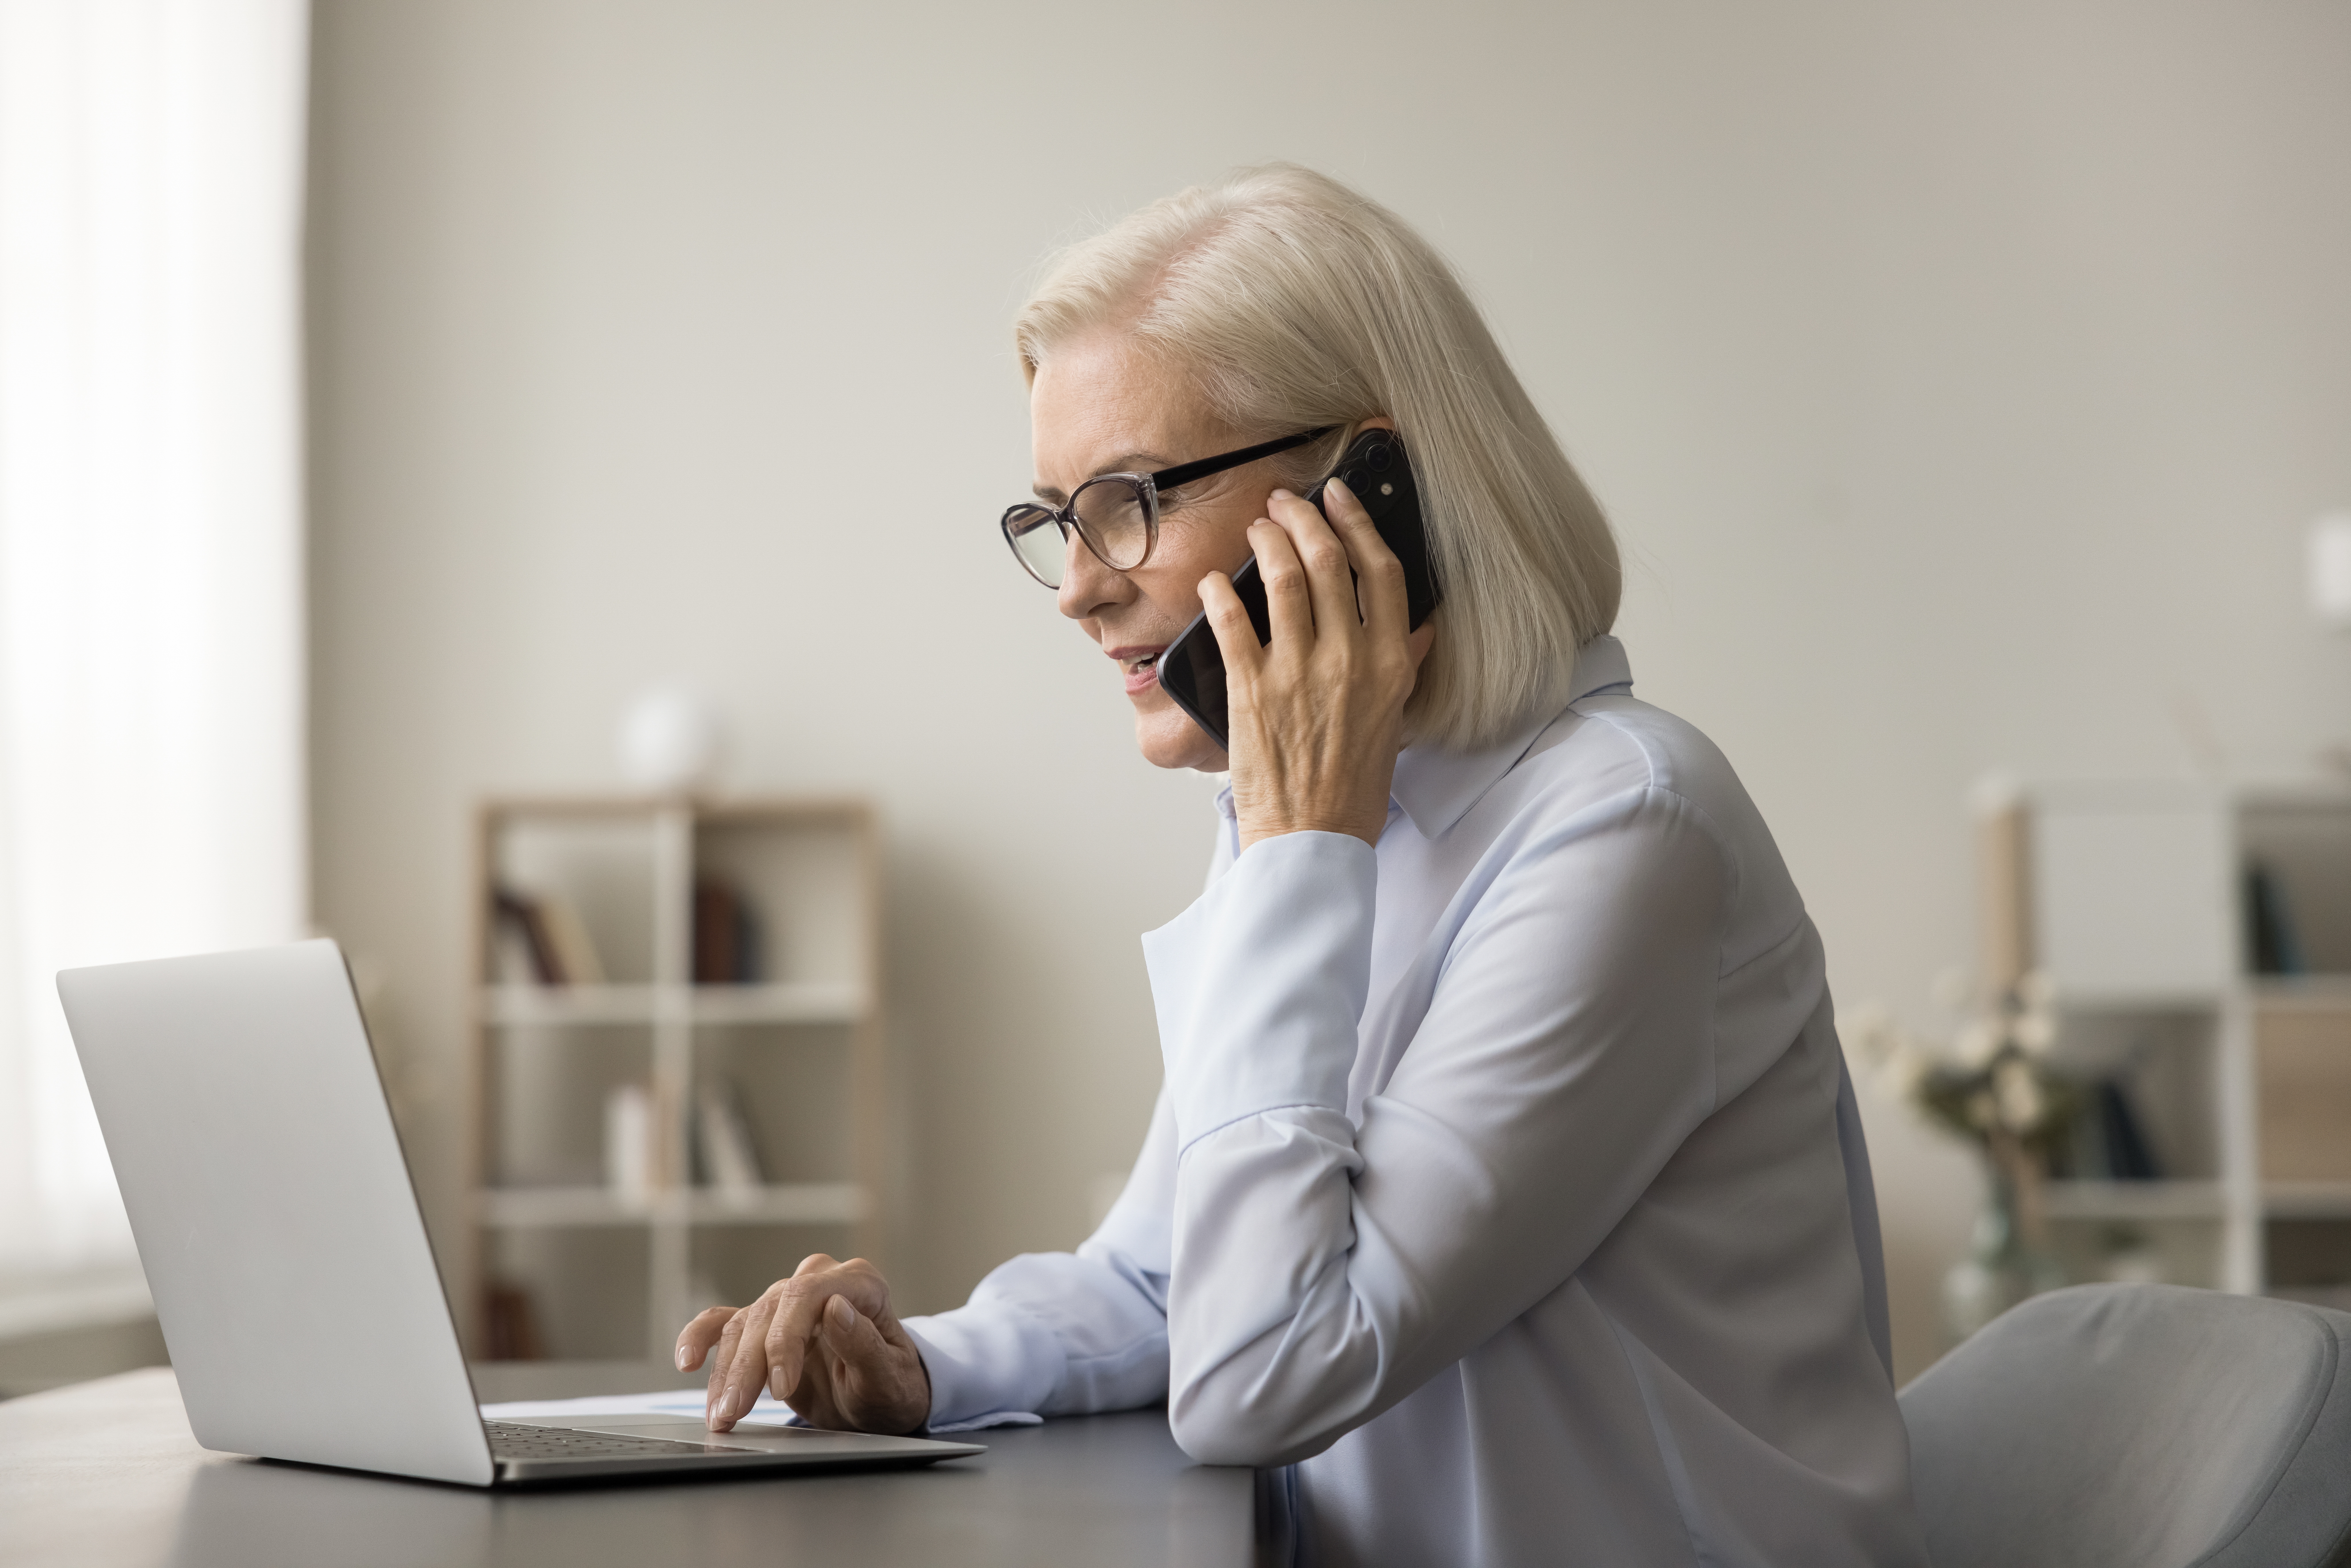 Woman talking on the phone in front of a laptop | Source: Shutterstock